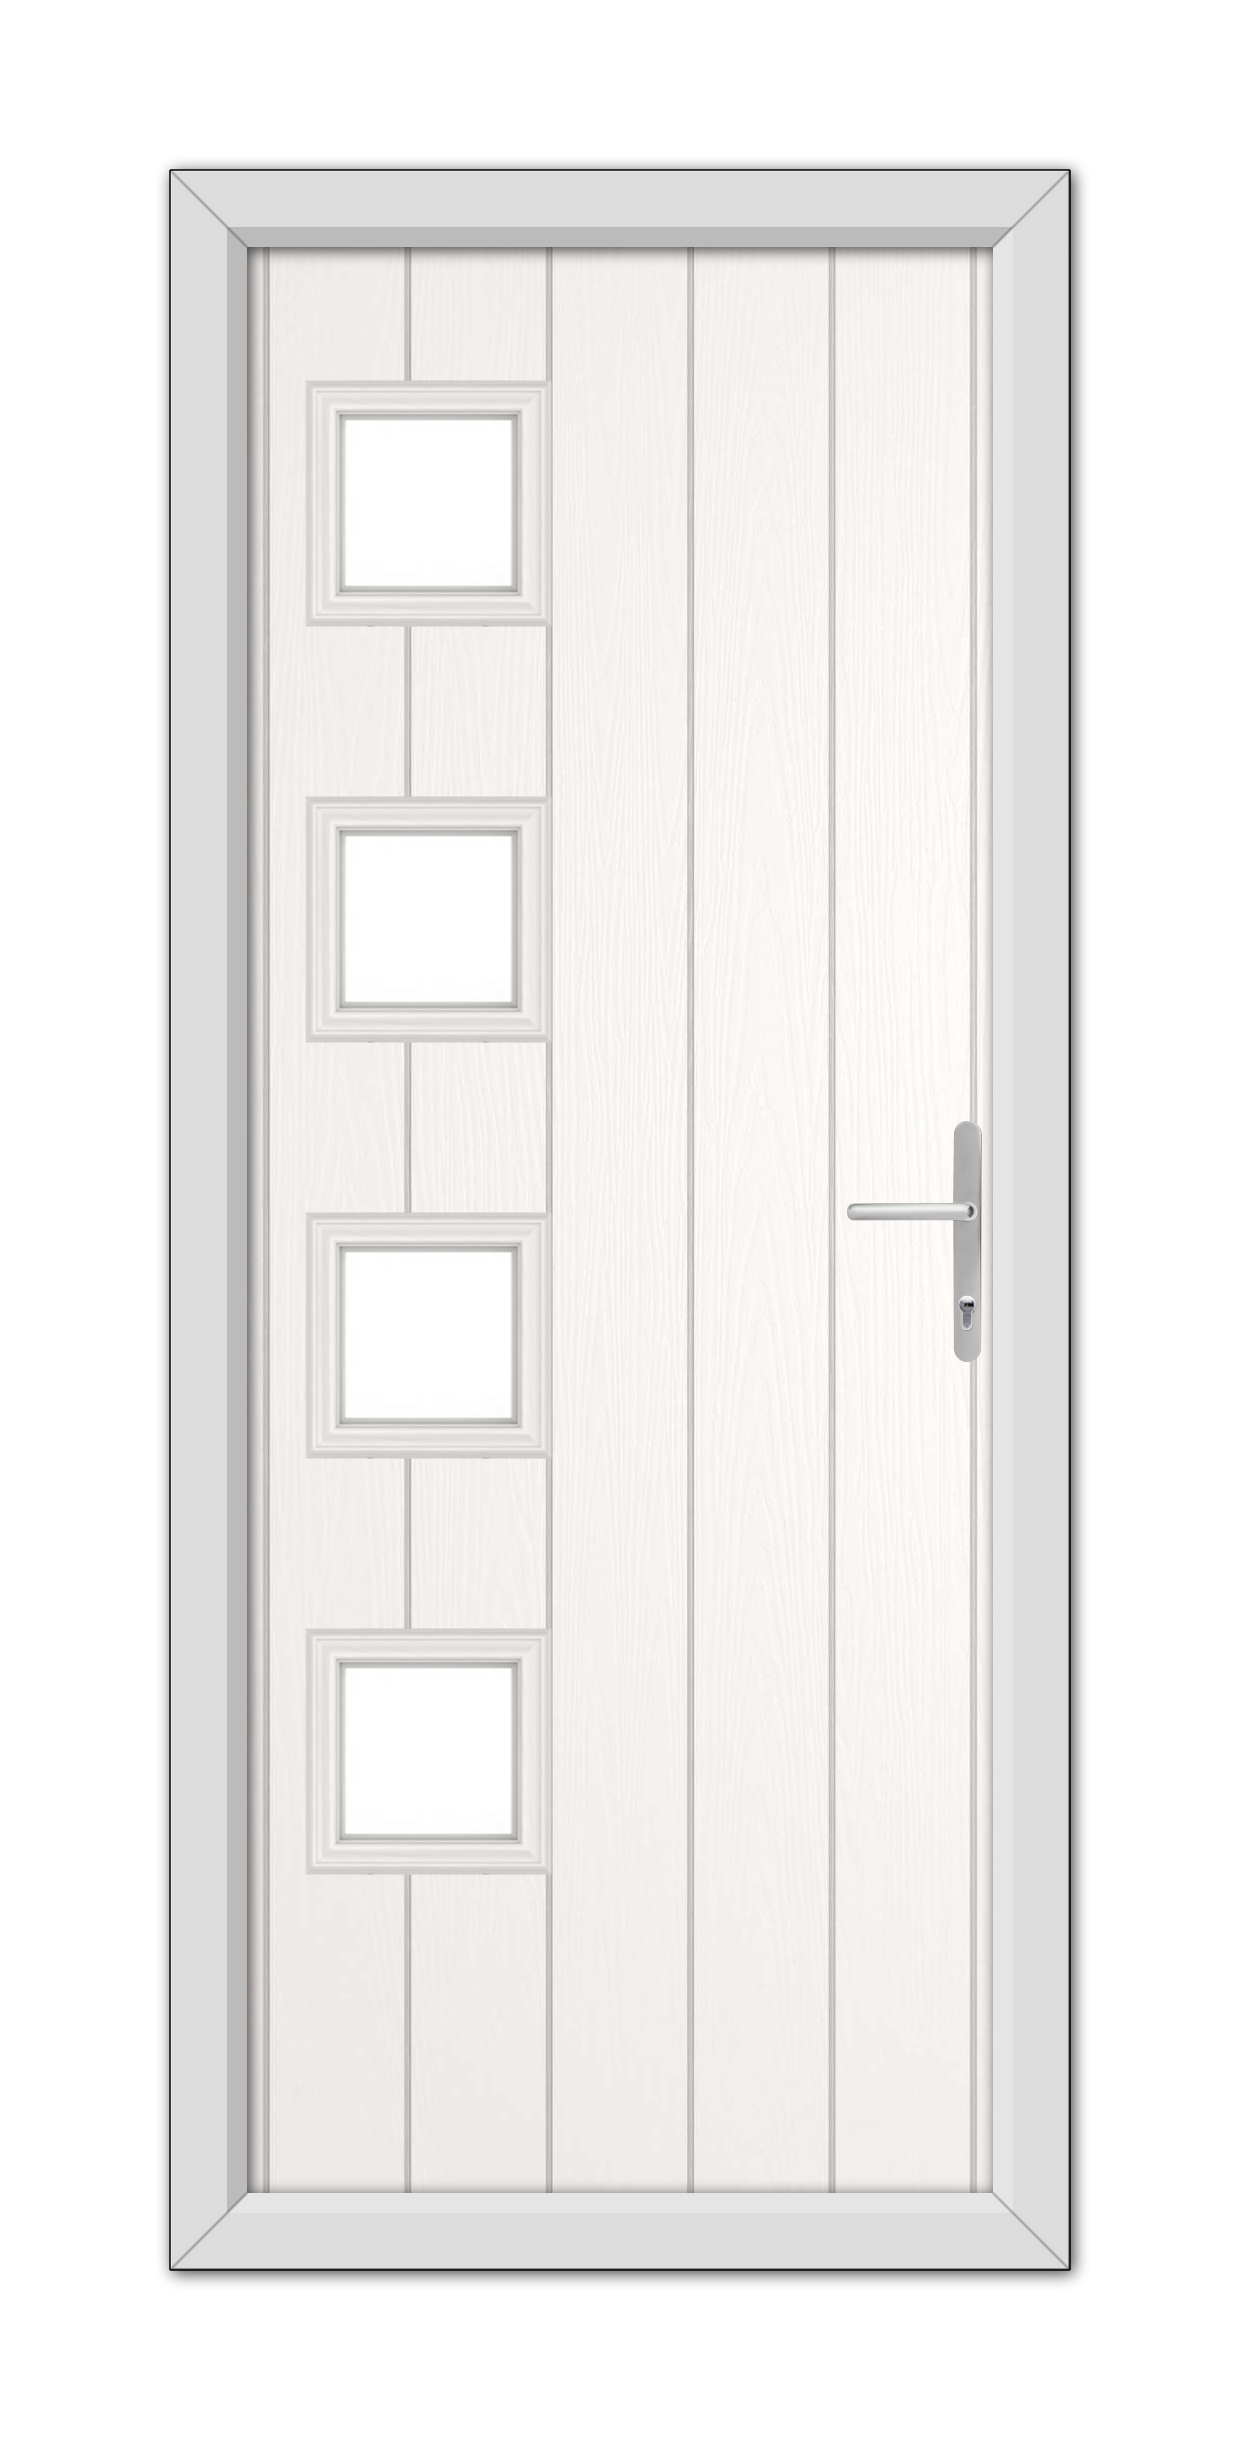 A modern White Sussex Composite Door 48mm Timber Core with a vertical handle and four horizontal glass panels, set within a simple frame.